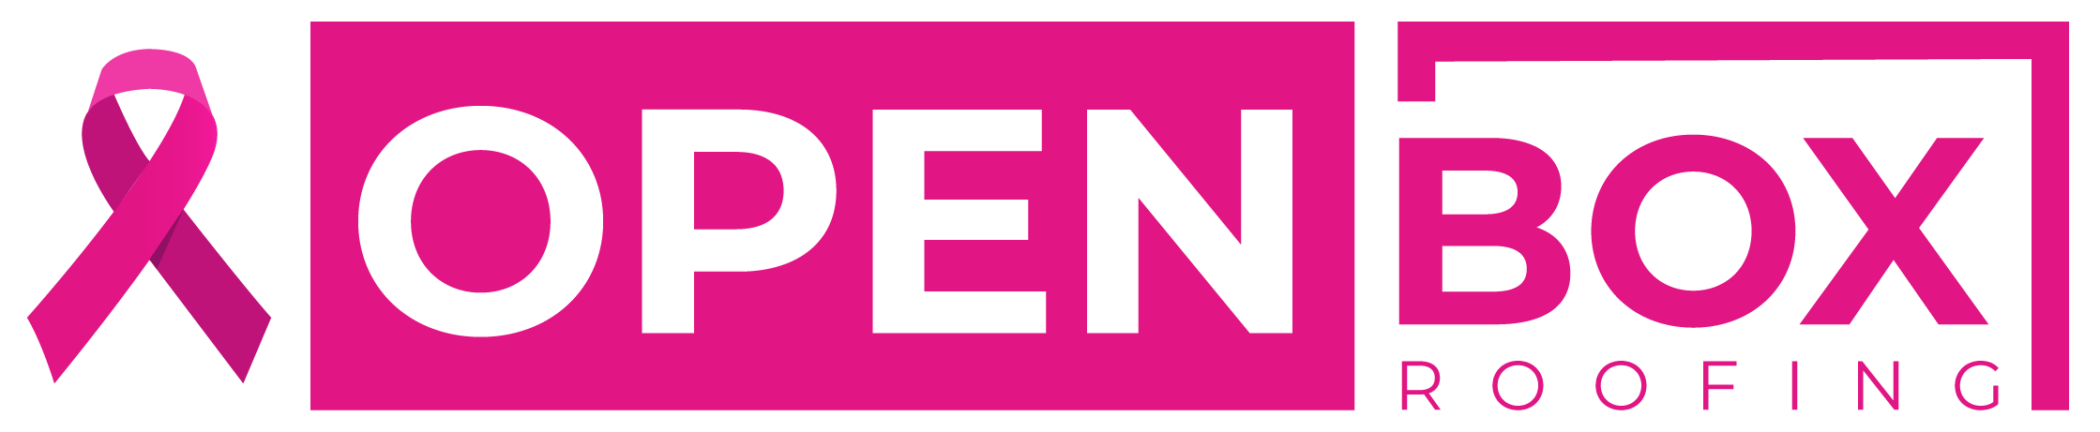 Open Box Roofing logo - breast cancer awareness